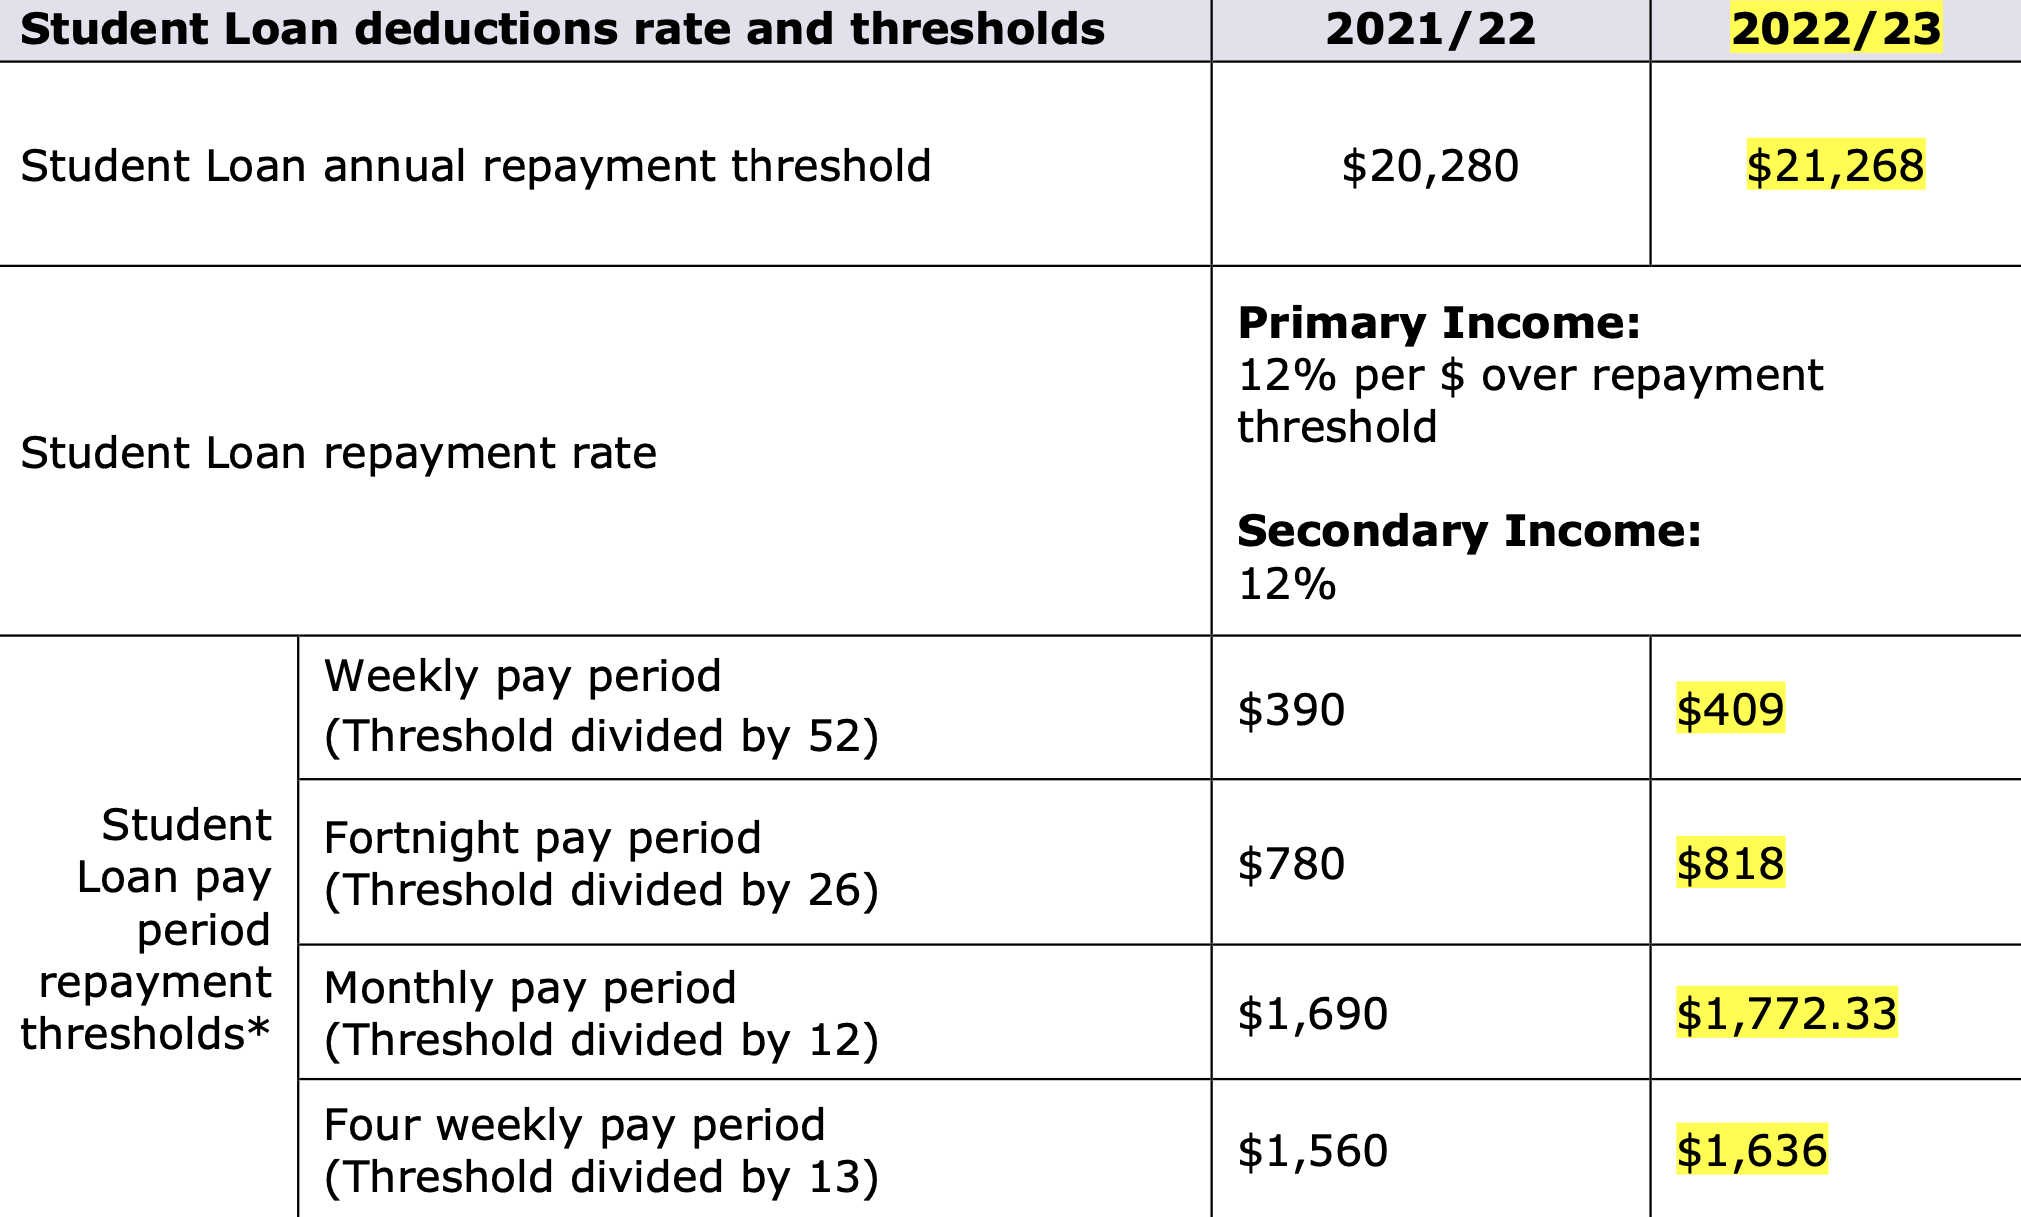 Student Loan Deductions Rates and Thresholds